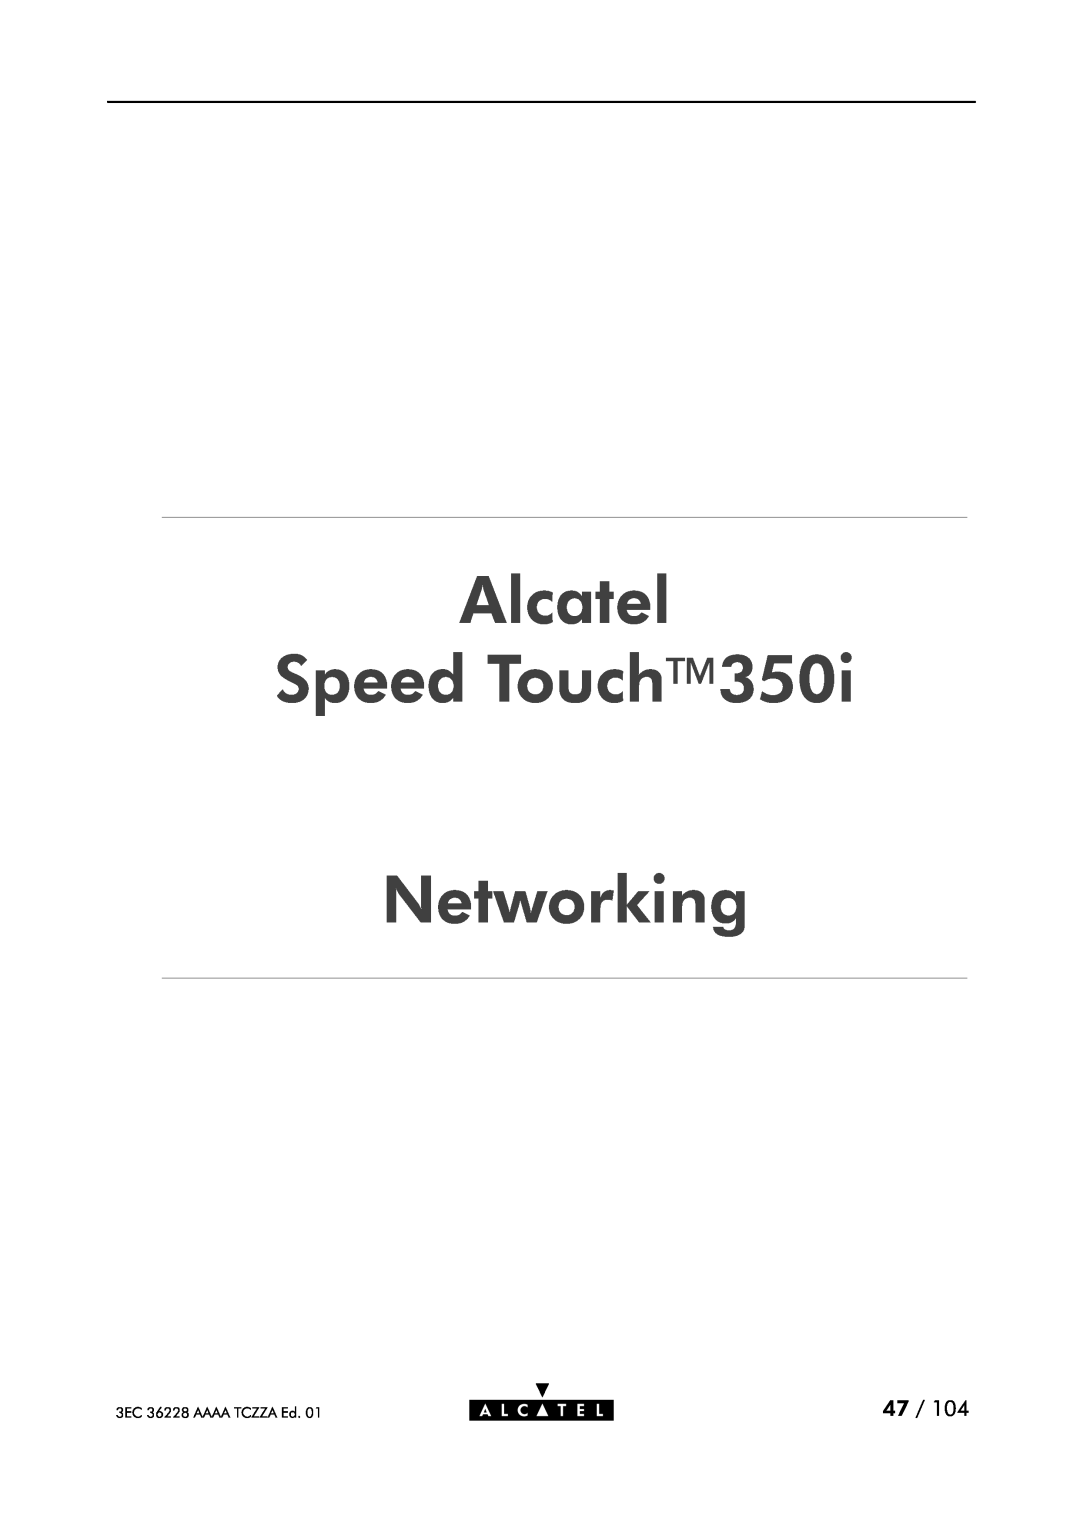 Alcatel Carrier Internetworking Solutions 350I manual Alcatel Speed Touch Networking, 3EC 36228 AAAA TCZZA Ed 